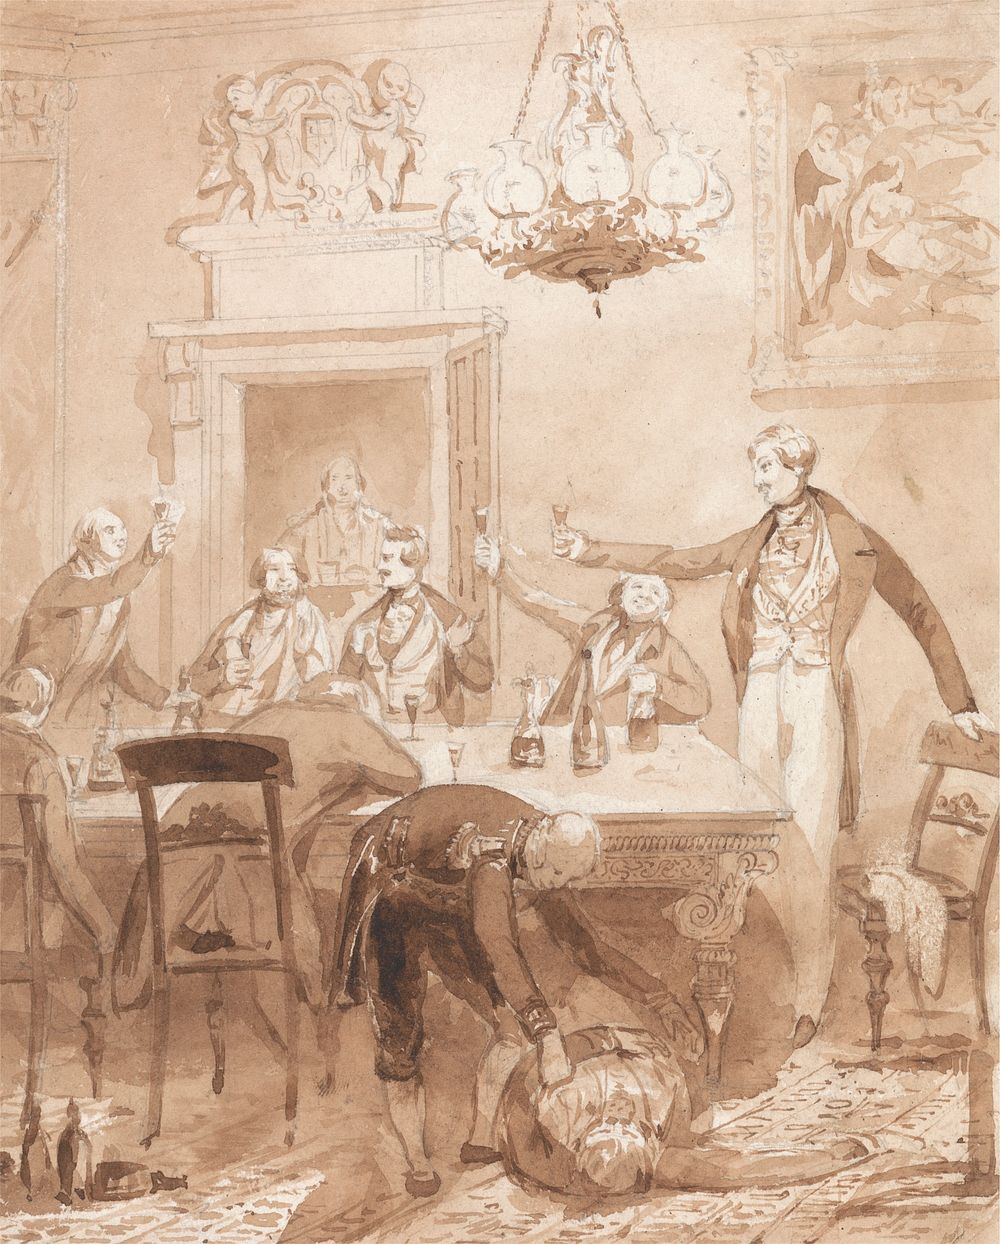 The Life of a Nobleman: Scene the Second - The First Party by Henry Dawe